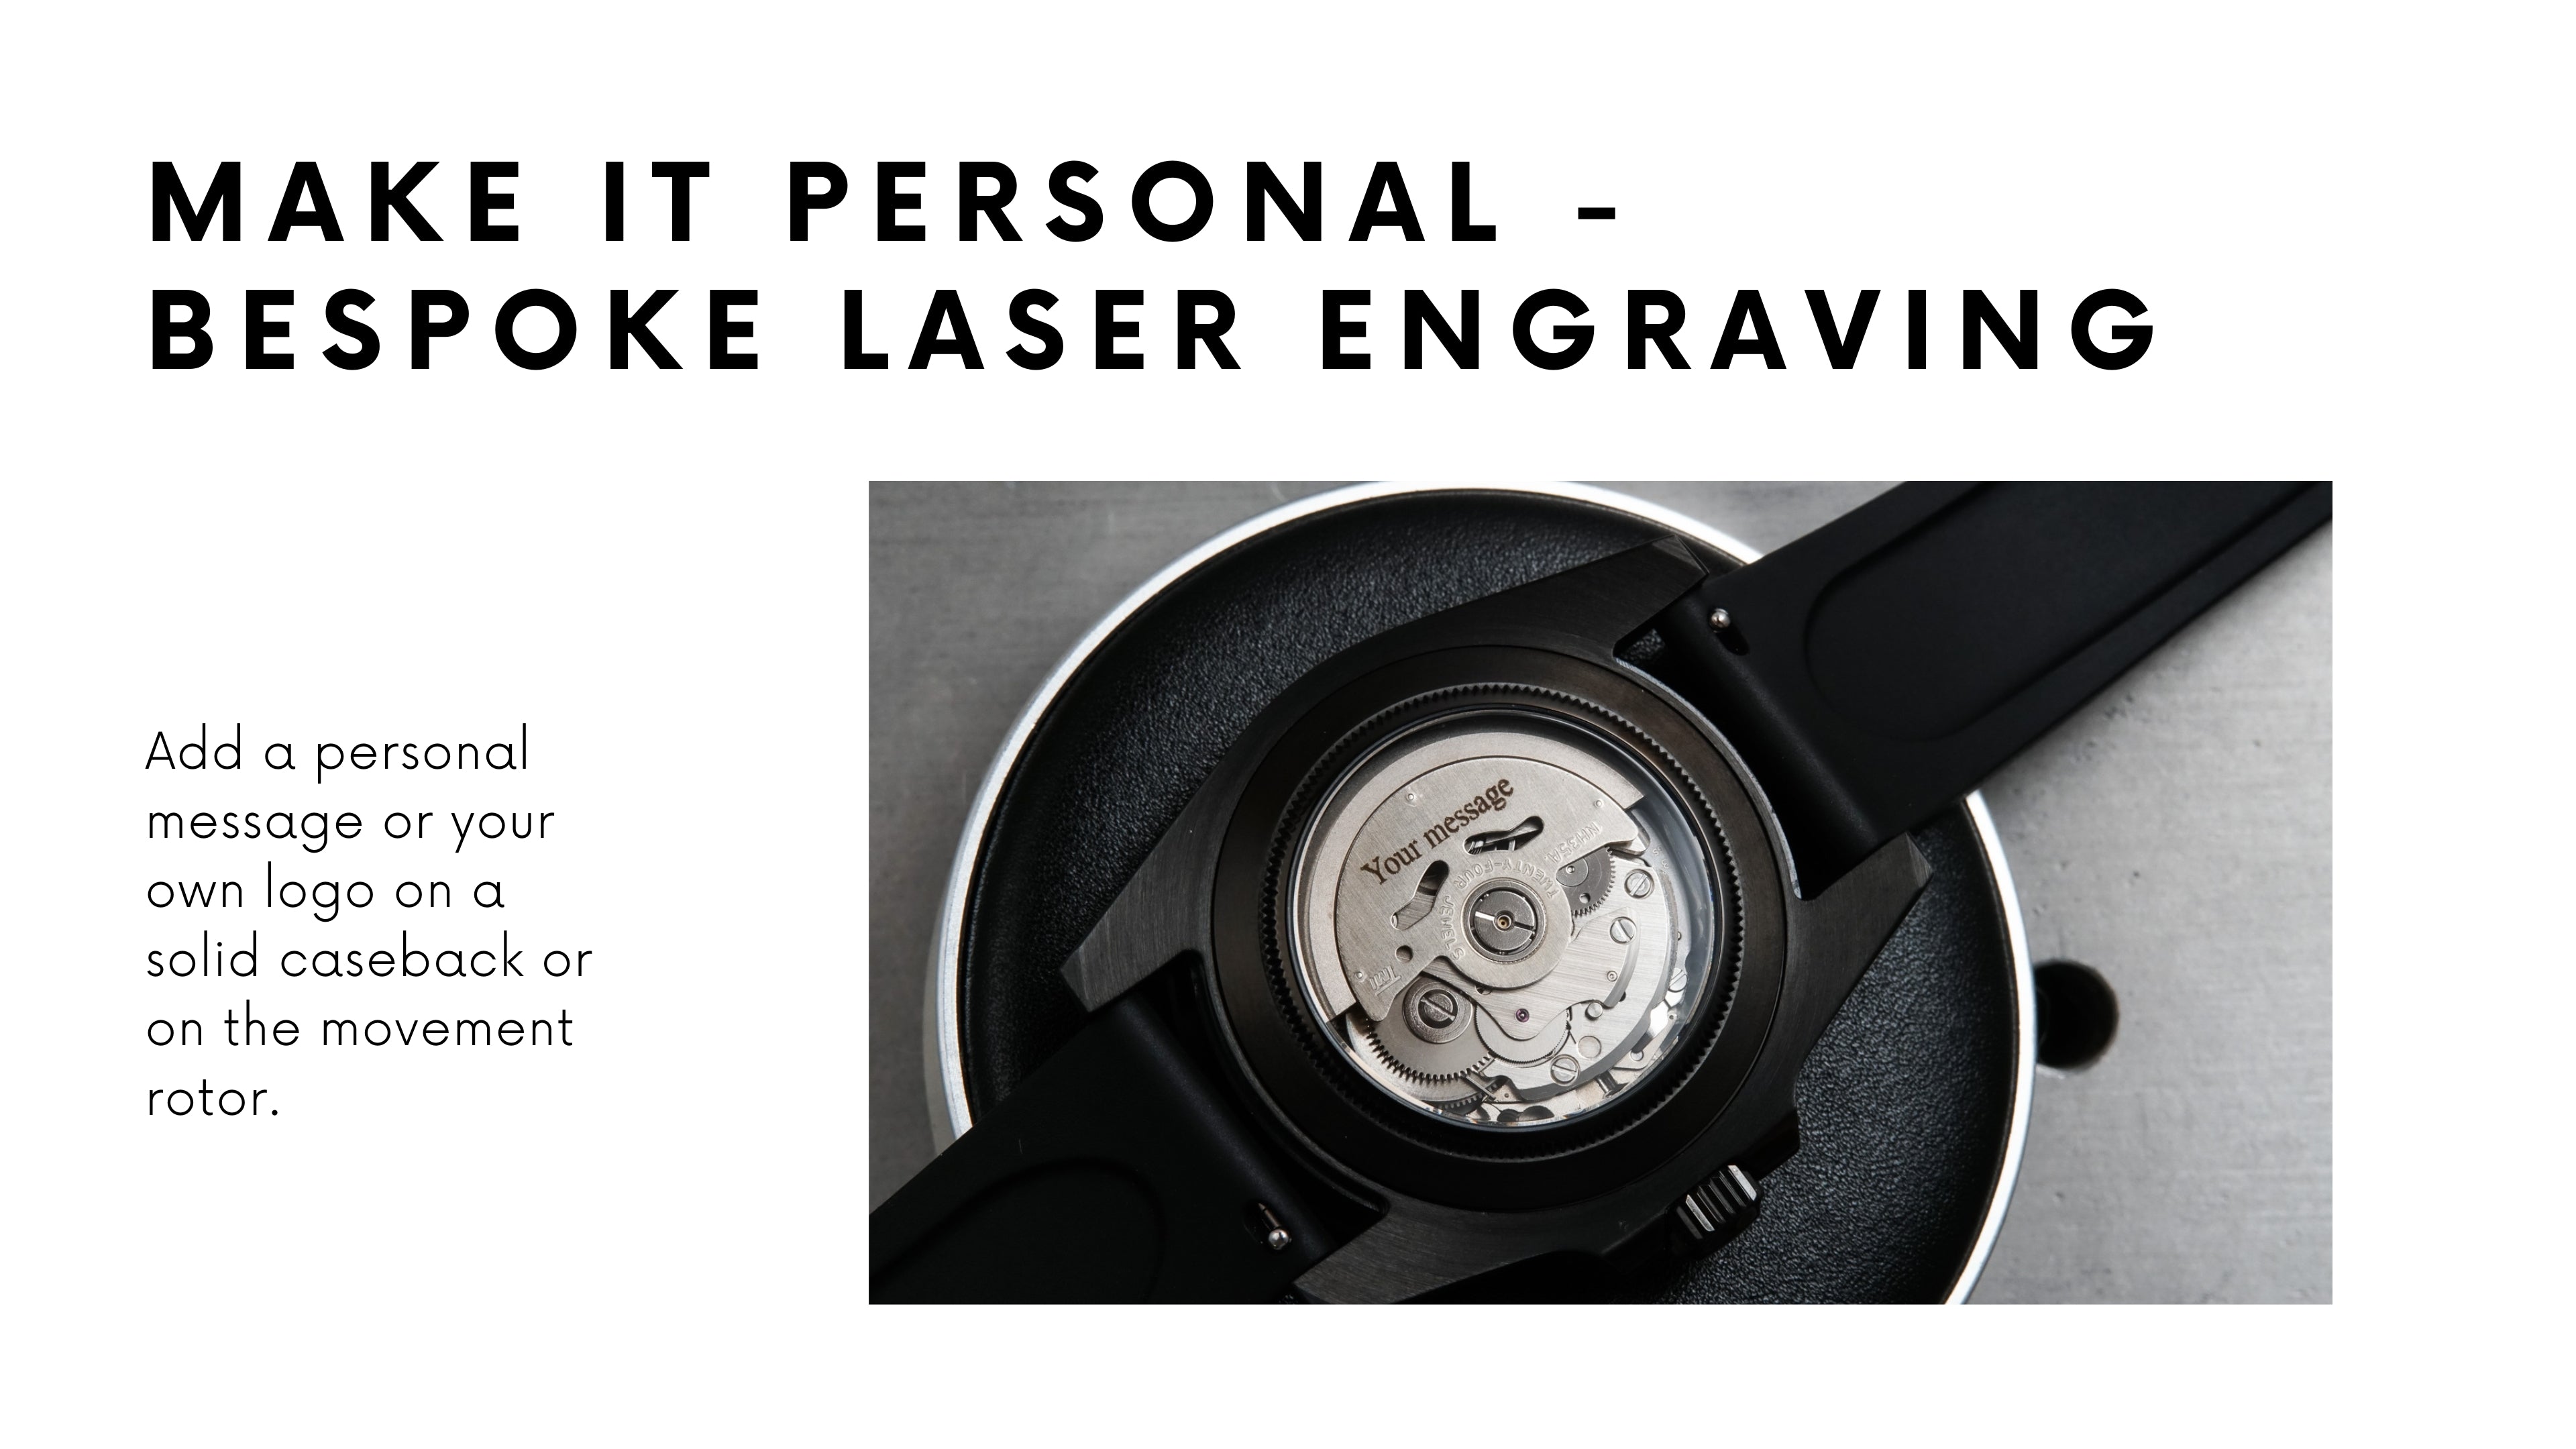 Laser engraving service - Personalise your watch